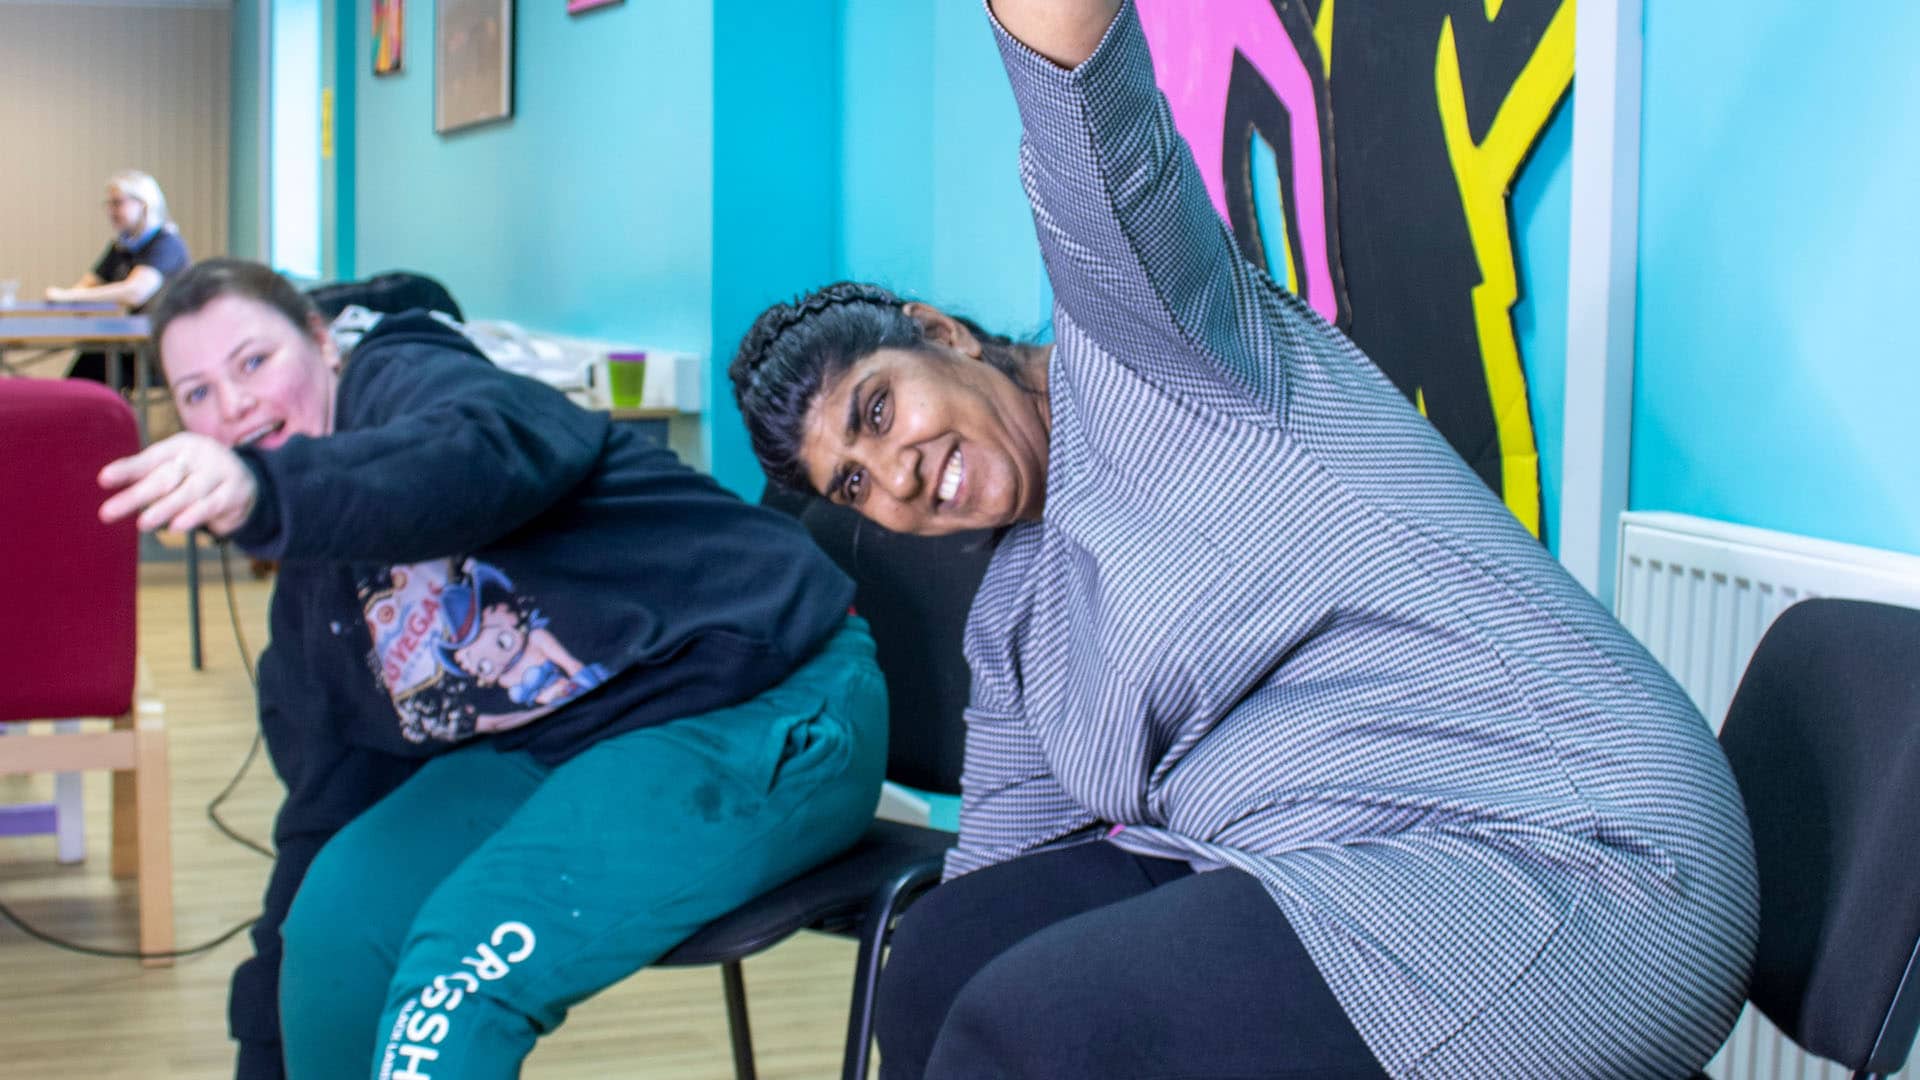 Two service users sat in chairs doing stretches with big smiles on their faces